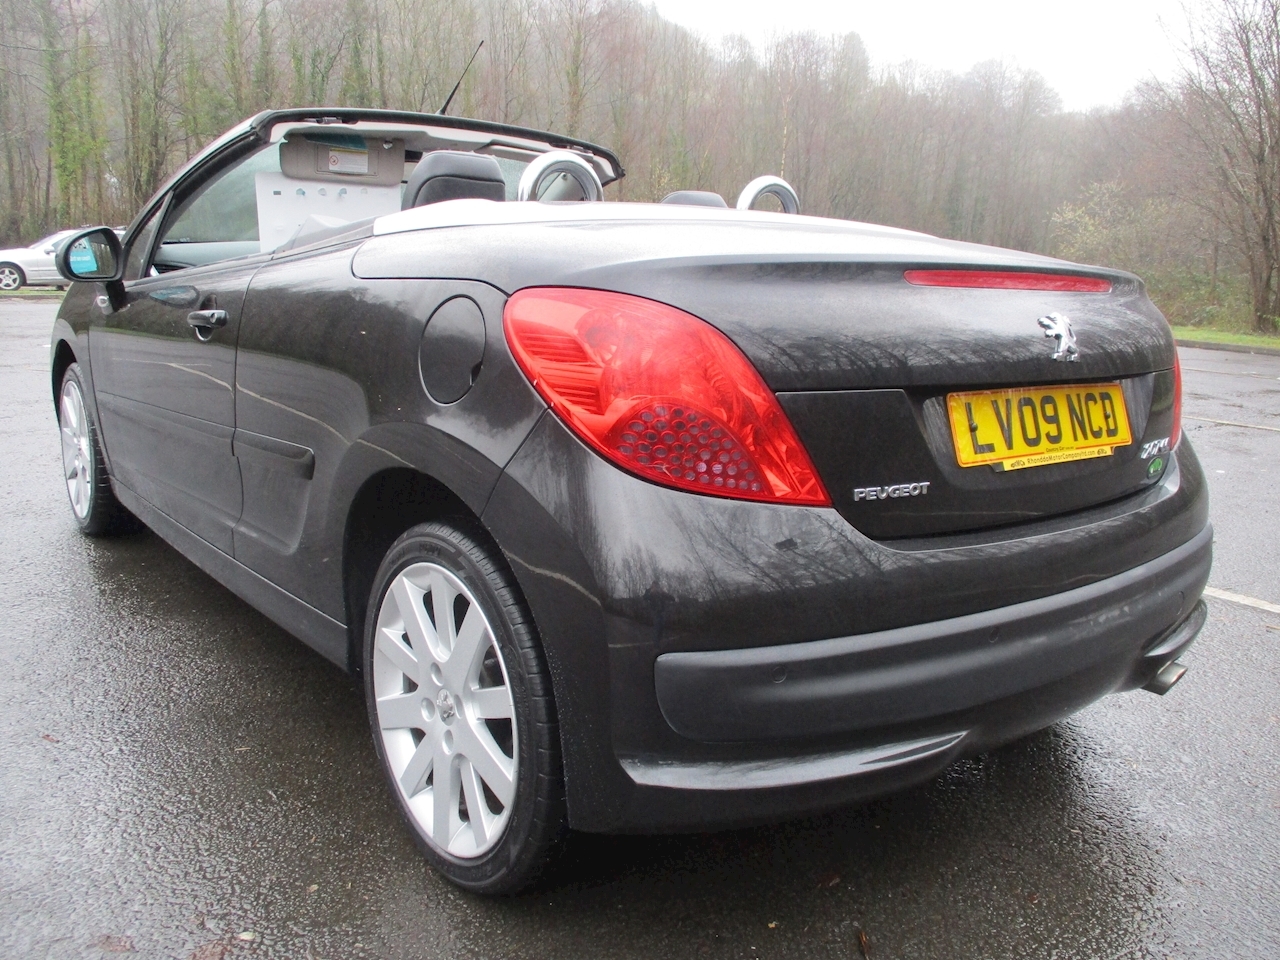 207 Gt Coupe Cabriolet Convertible 1.6 Manual Petrol